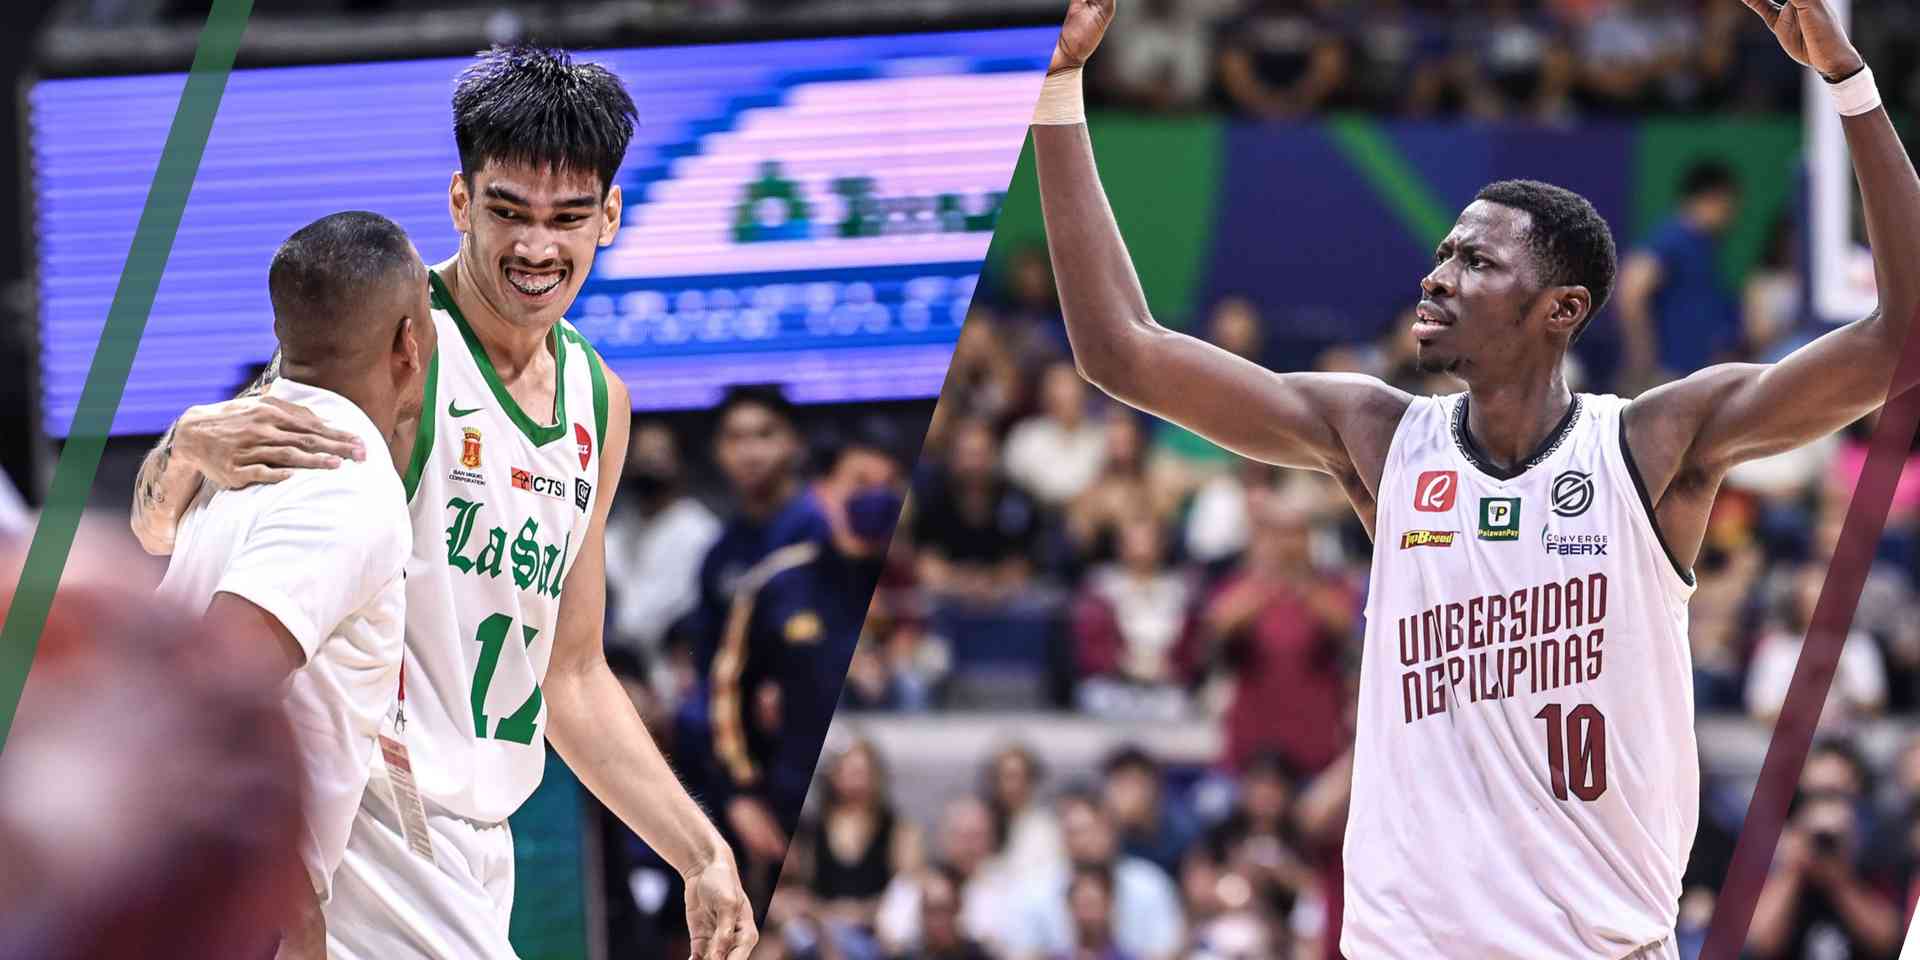 UP, La Salle advance to advance in UAAP S86 Finals